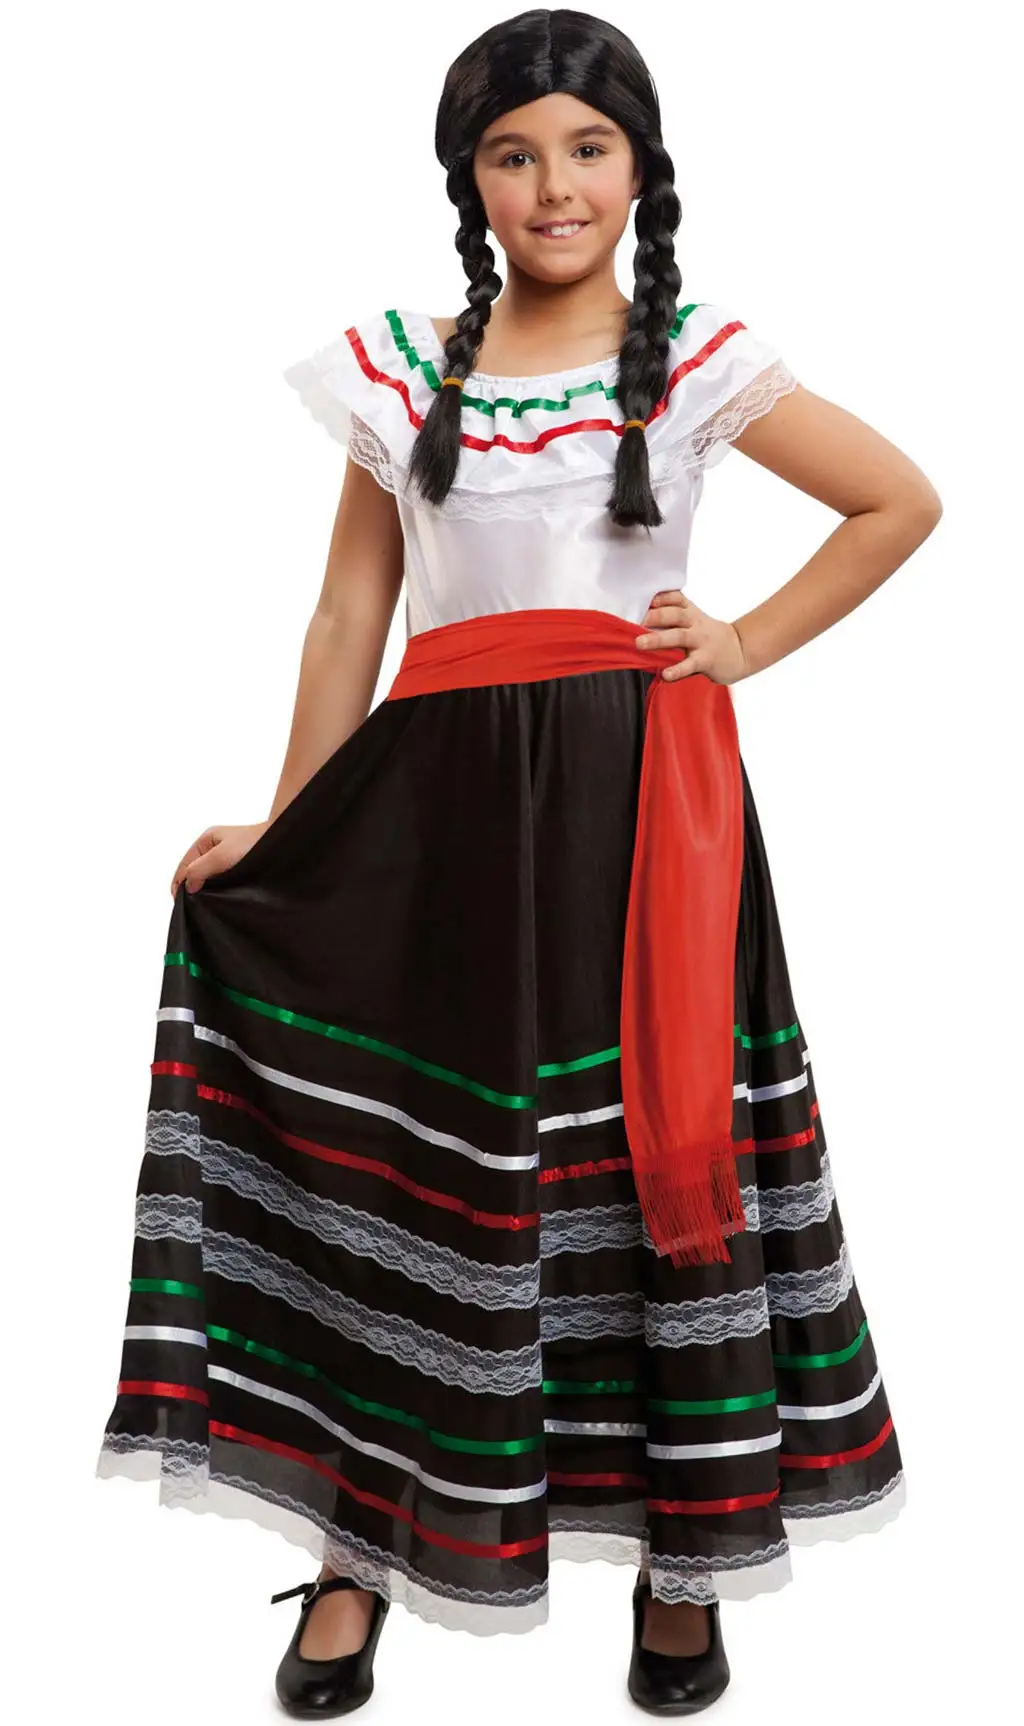 Adelita Mexican Costume For Girl - Cosplay Costumes - AliExpress